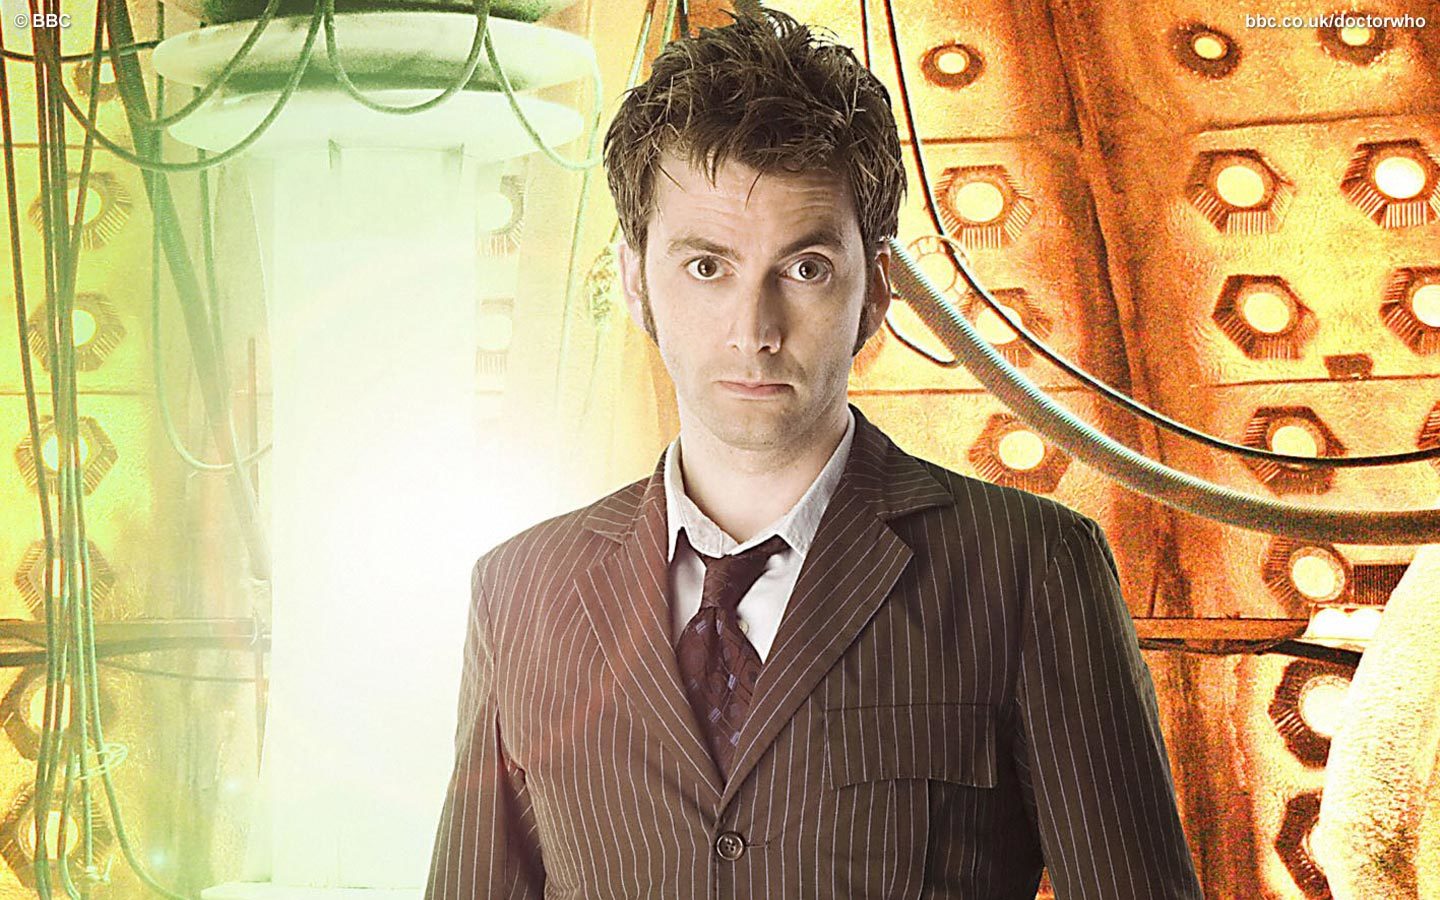 Doctor  Wallpaper on David Tennant Doctor Who Tenth Hd Wallpaper   Celebrity   Actress